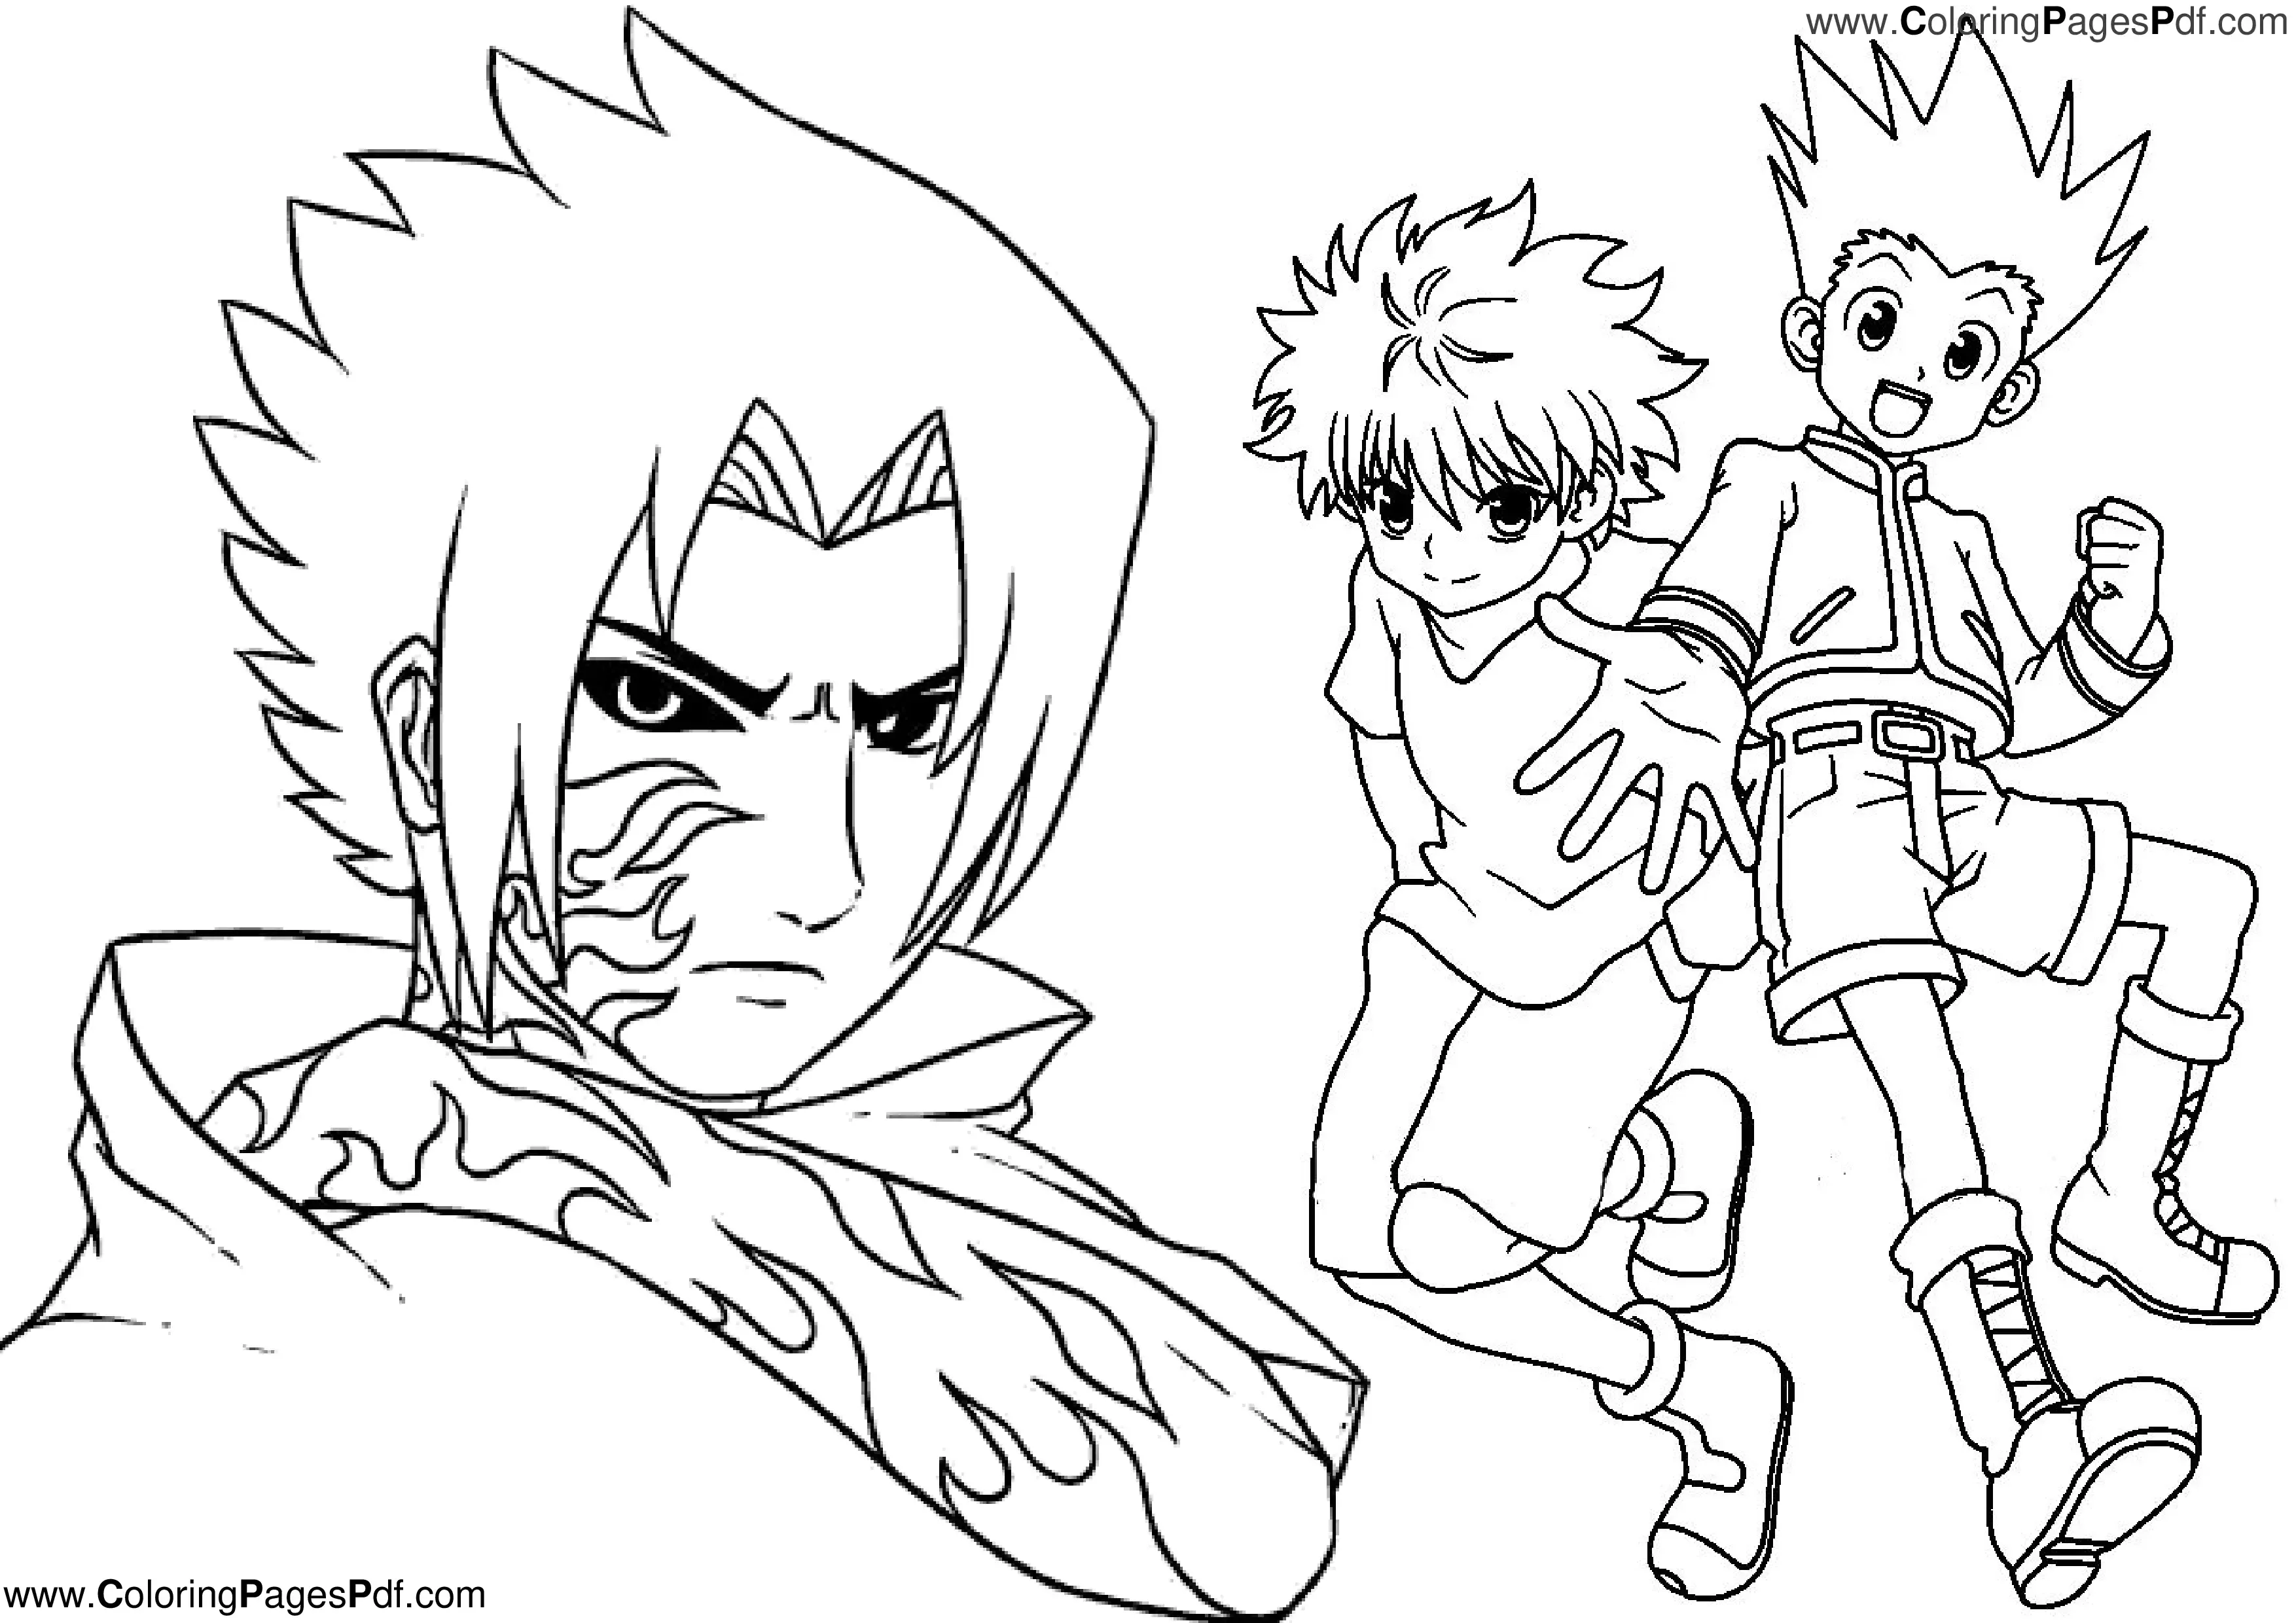 Anime coloring pages easy